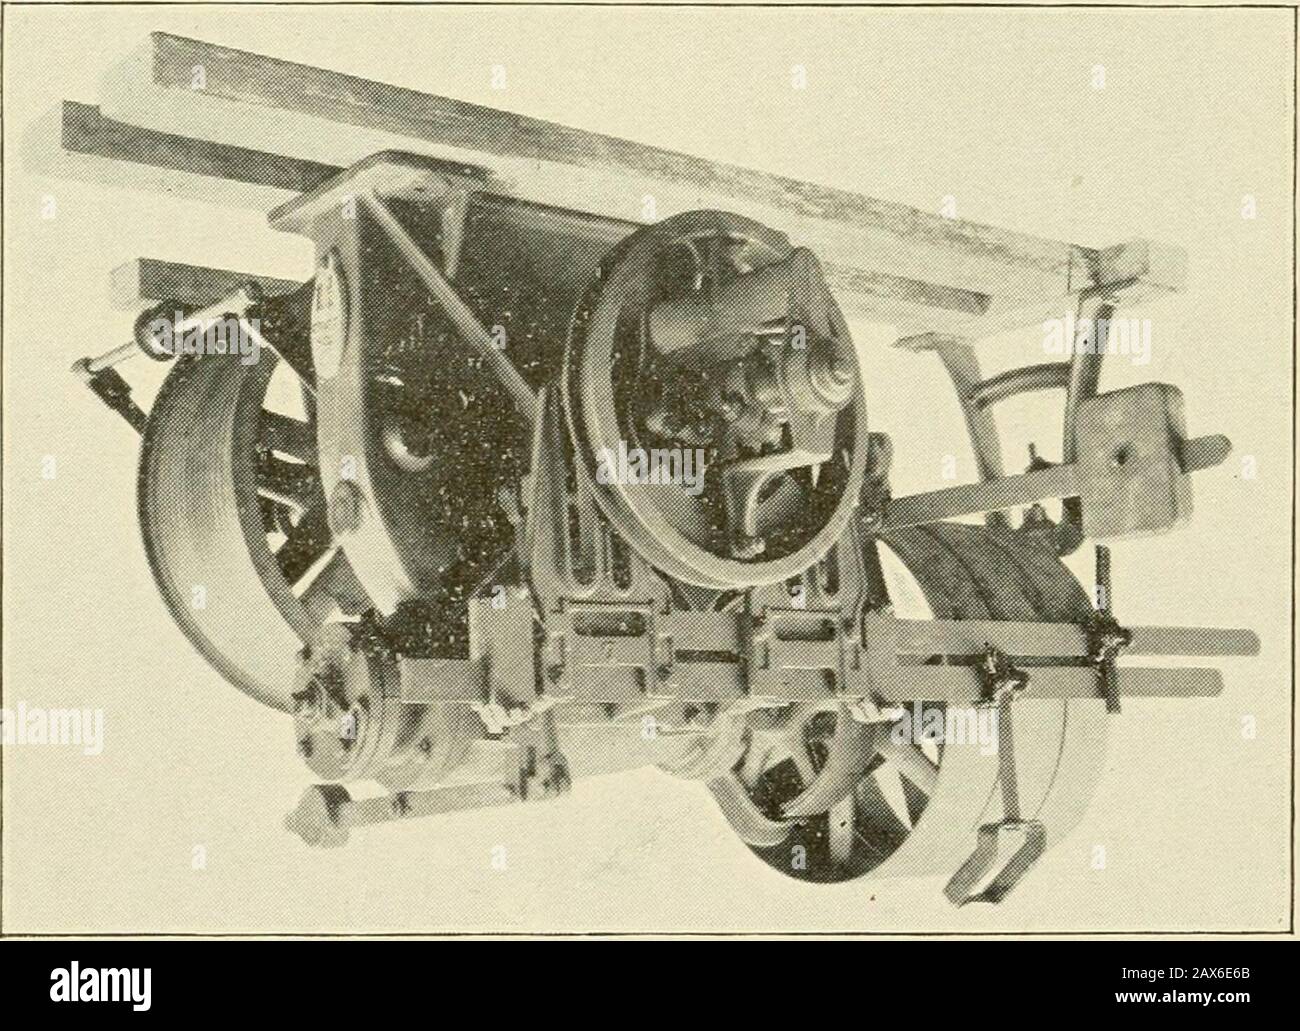 Useful information for cotton manufacturers . YS ELEVATORS.Belt Power Machines. The Improved Hindley Worm and Gear is used on all beltpower machines of this make. As these are the main feattiresof the hoist, special attention is paid to them. The shape of this worm and gear is f shown in the marginal cut. The wormis cut from a solid blank, curved to cor-respond to the arc of the wheel, so thatthere is a variation of pitch from point toroot of tooth. This variation of distancefrom center to center of teeth in the wormexactly corresponds to the two diametersof teeth of the wheel, thus giving a p Stock Photo